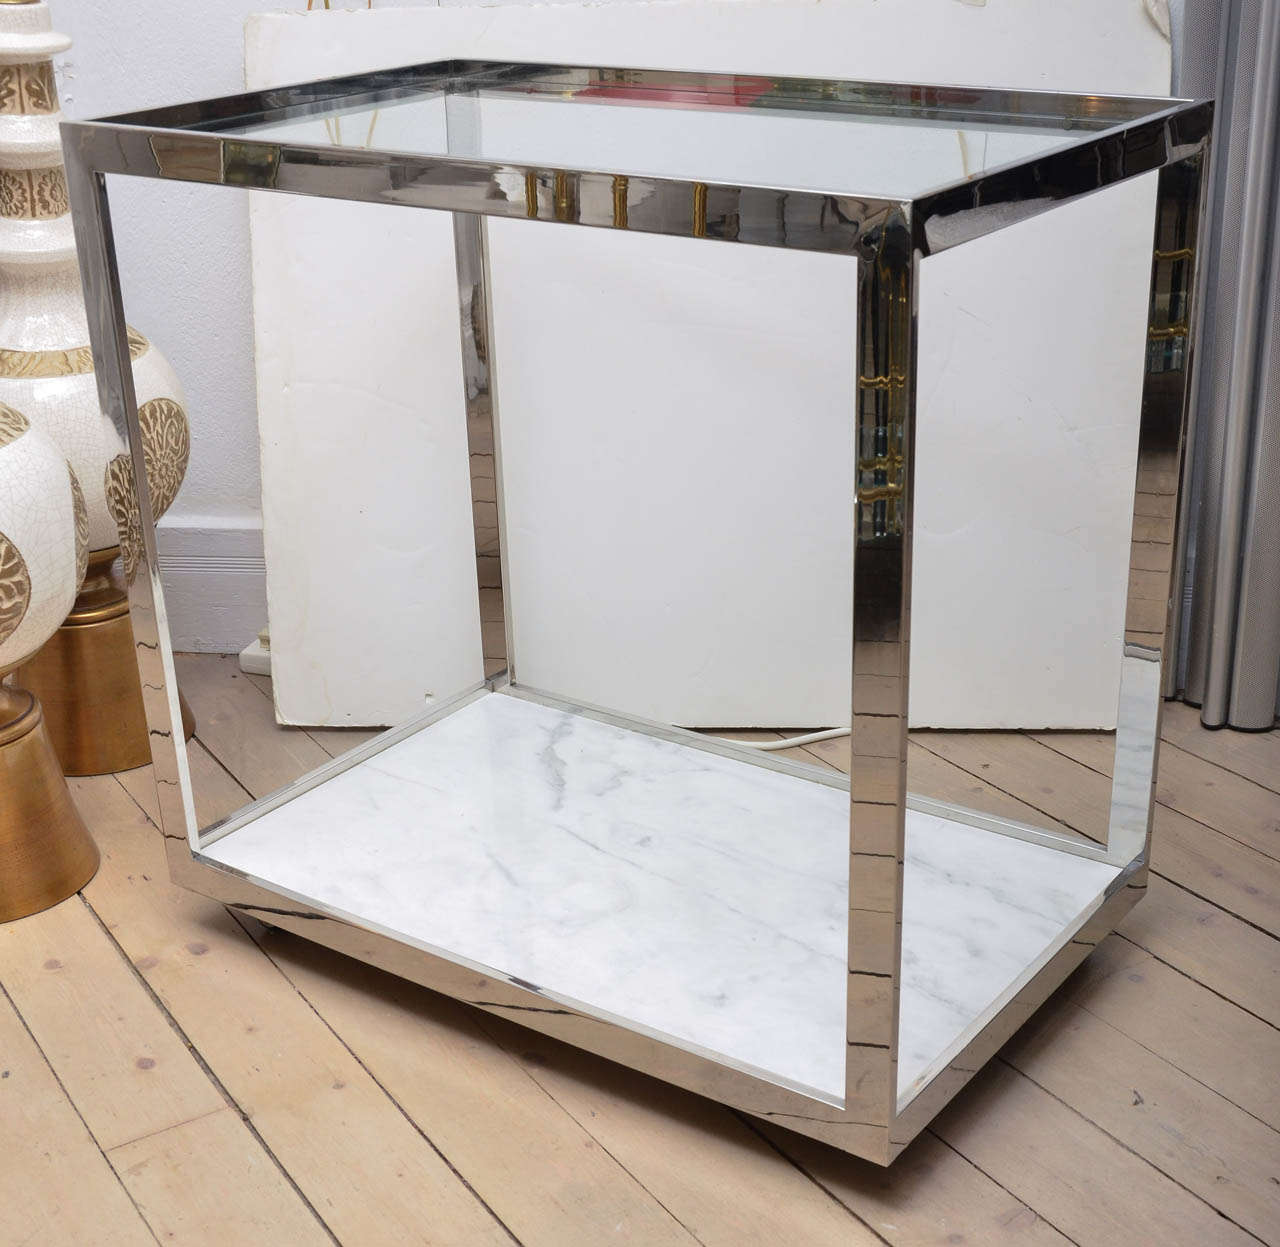 illustrious American designer Milo Baughman created this wheeled bar cart with chromed steel and a marble bottom and clear glass top!